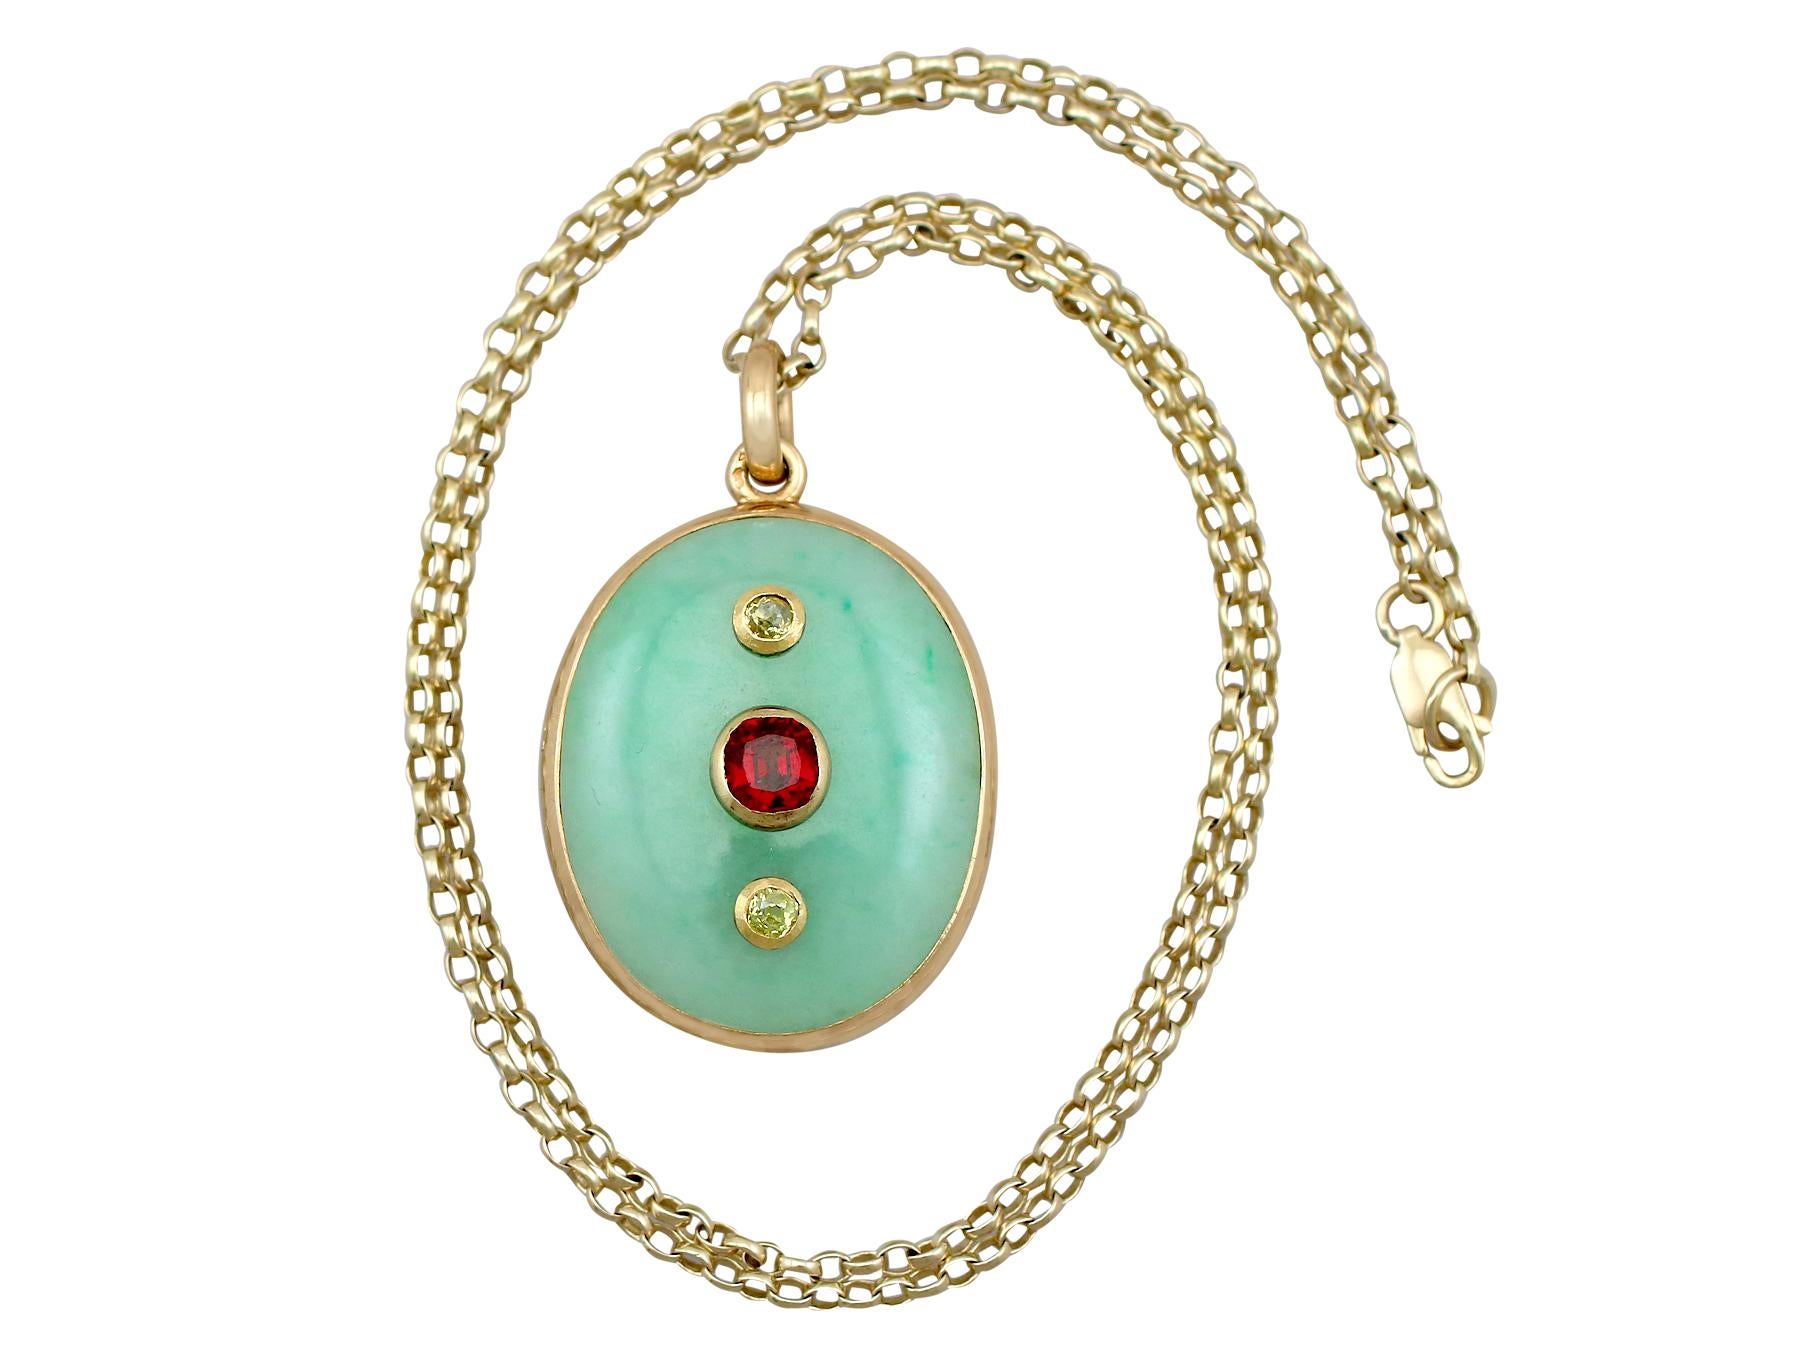 A stunning antique French jade and 0.98 carat garnet, 0.23 carat diamond and 18 karat yellow gold locket pendant; part of our diverse antique jewelry and estate jewelry collections.

This stunning, fine and impressive antique jade pendant has been